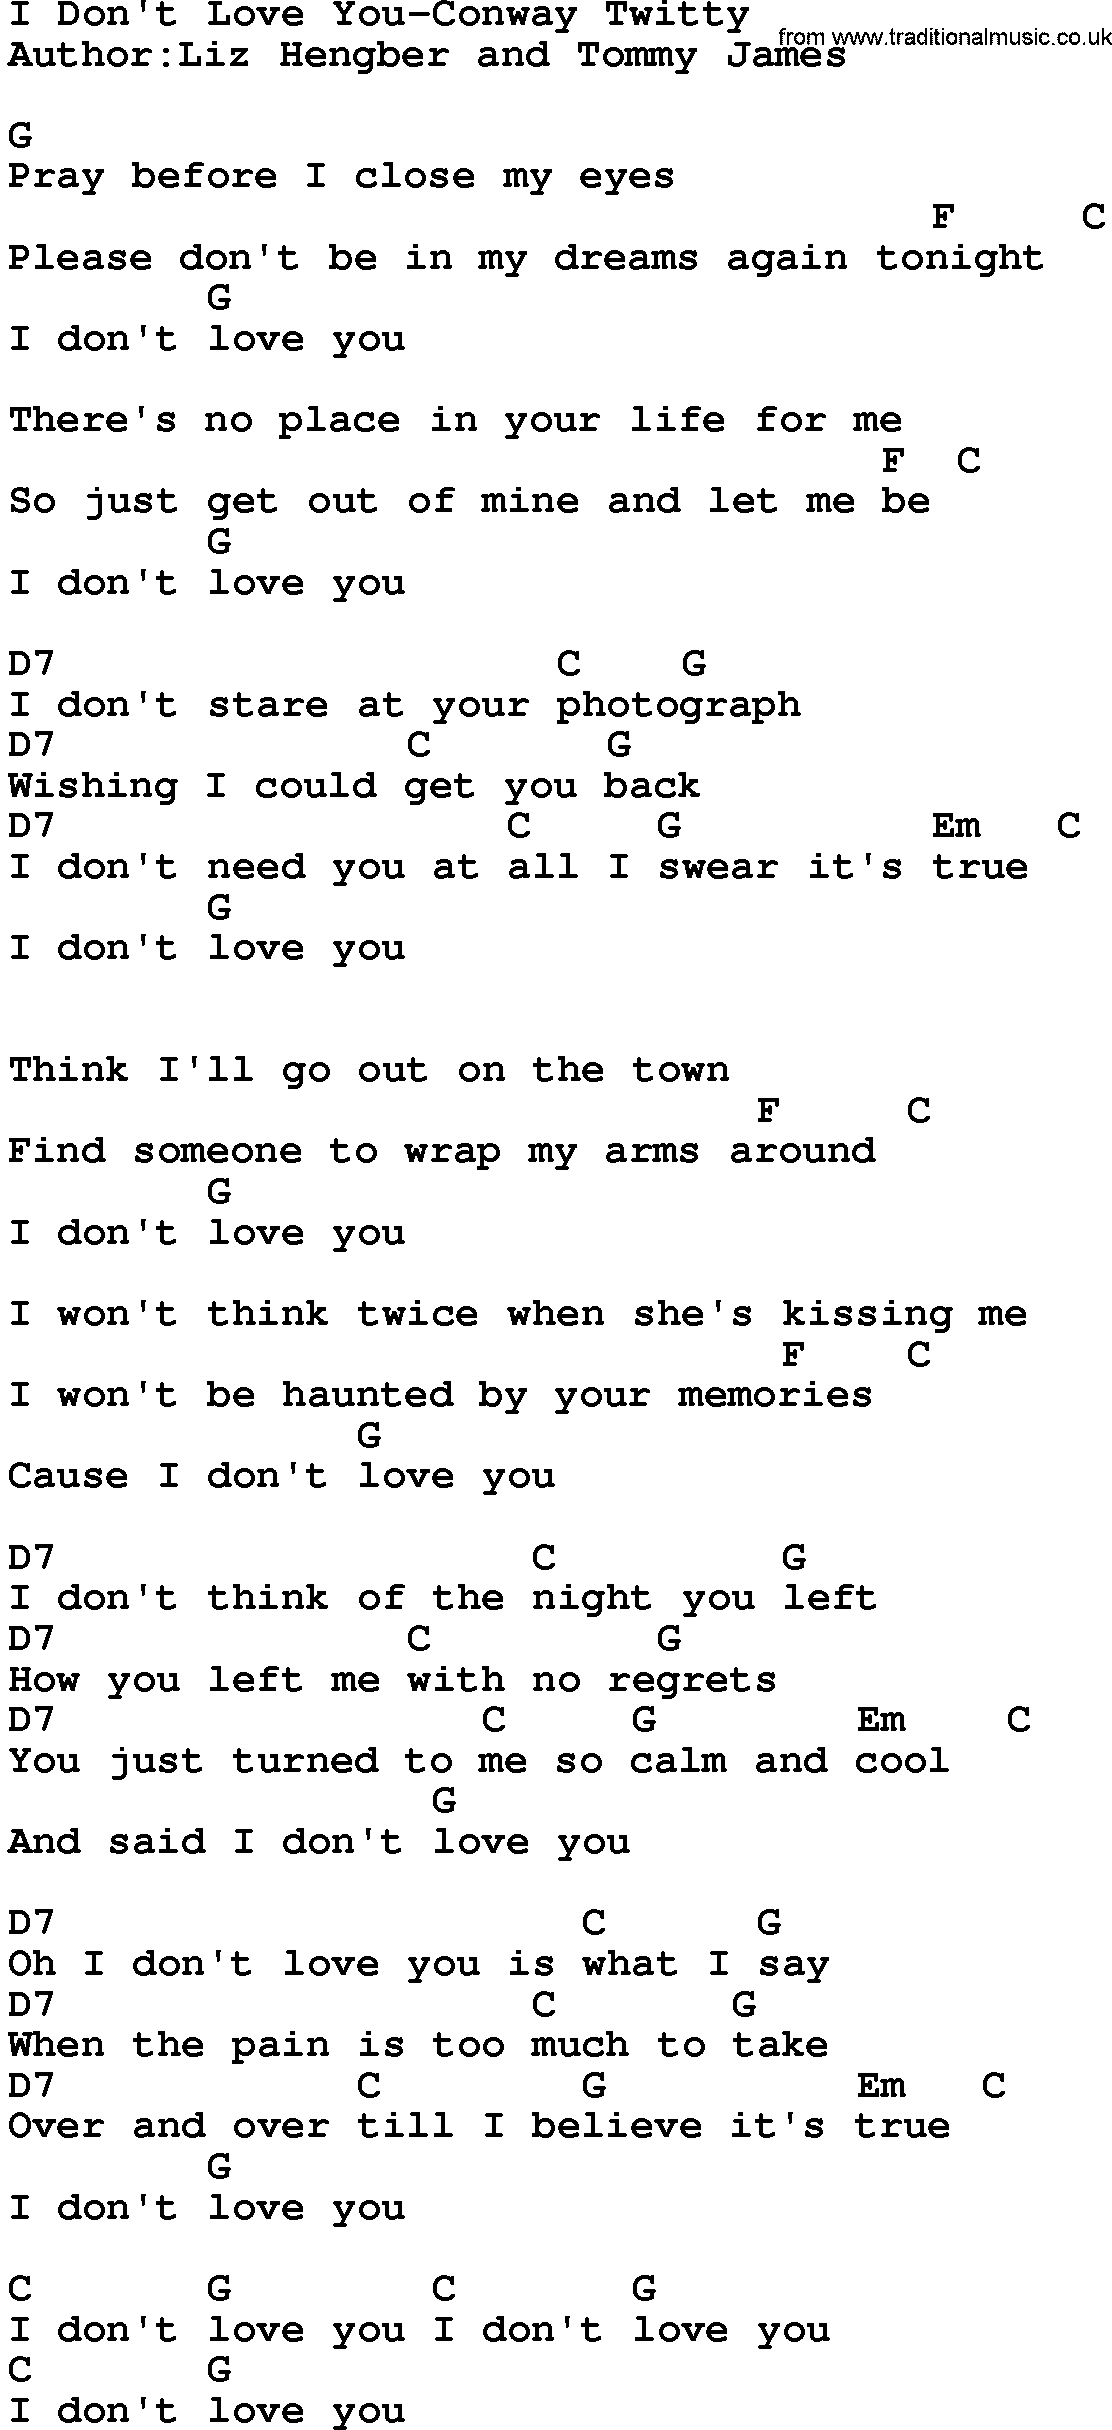 Country music song: I Don't Love You-Conway Twitty lyrics and chords